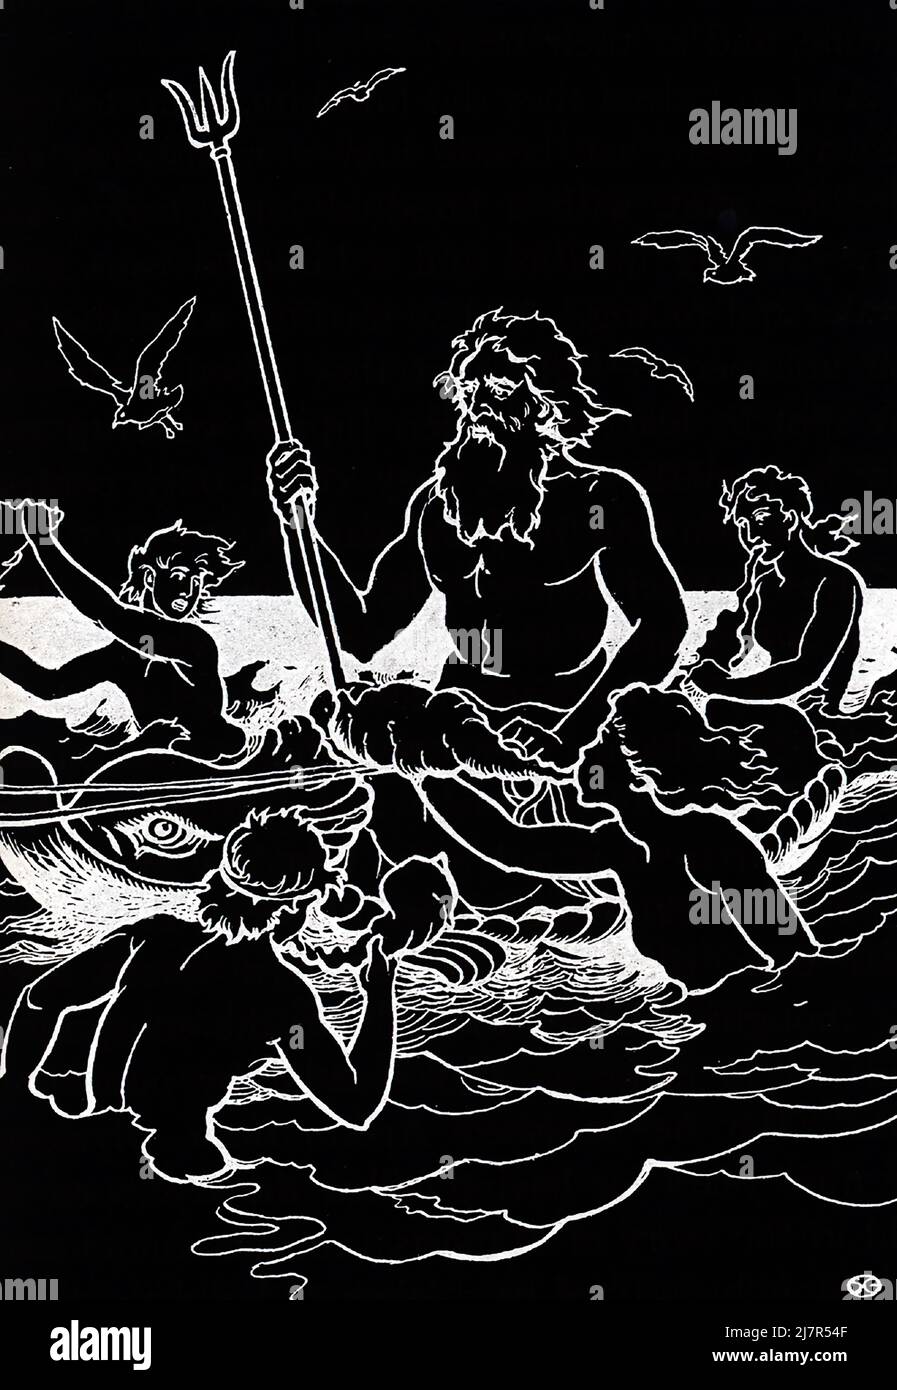 In ancient Roman mythology, Neptune was the god of the sea. To the ancient Greeks, he was Poseidon. He is often shown with long hair and sporting a bearded, as well as holding a trident, a three-pronged spear that is used for fishing and that is often associated with this god. Stock Photo